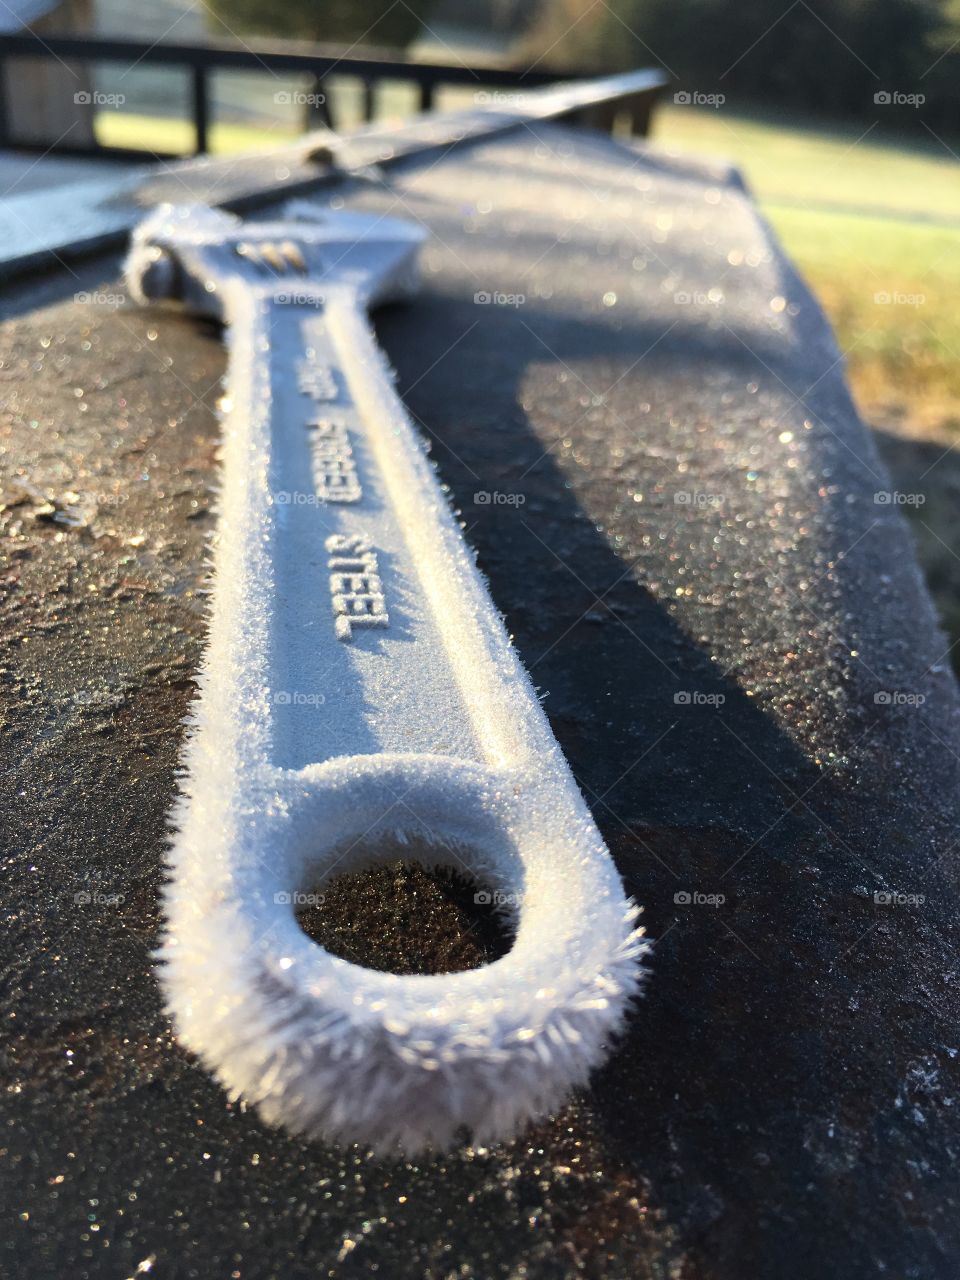 Frost on a forgotten tool.